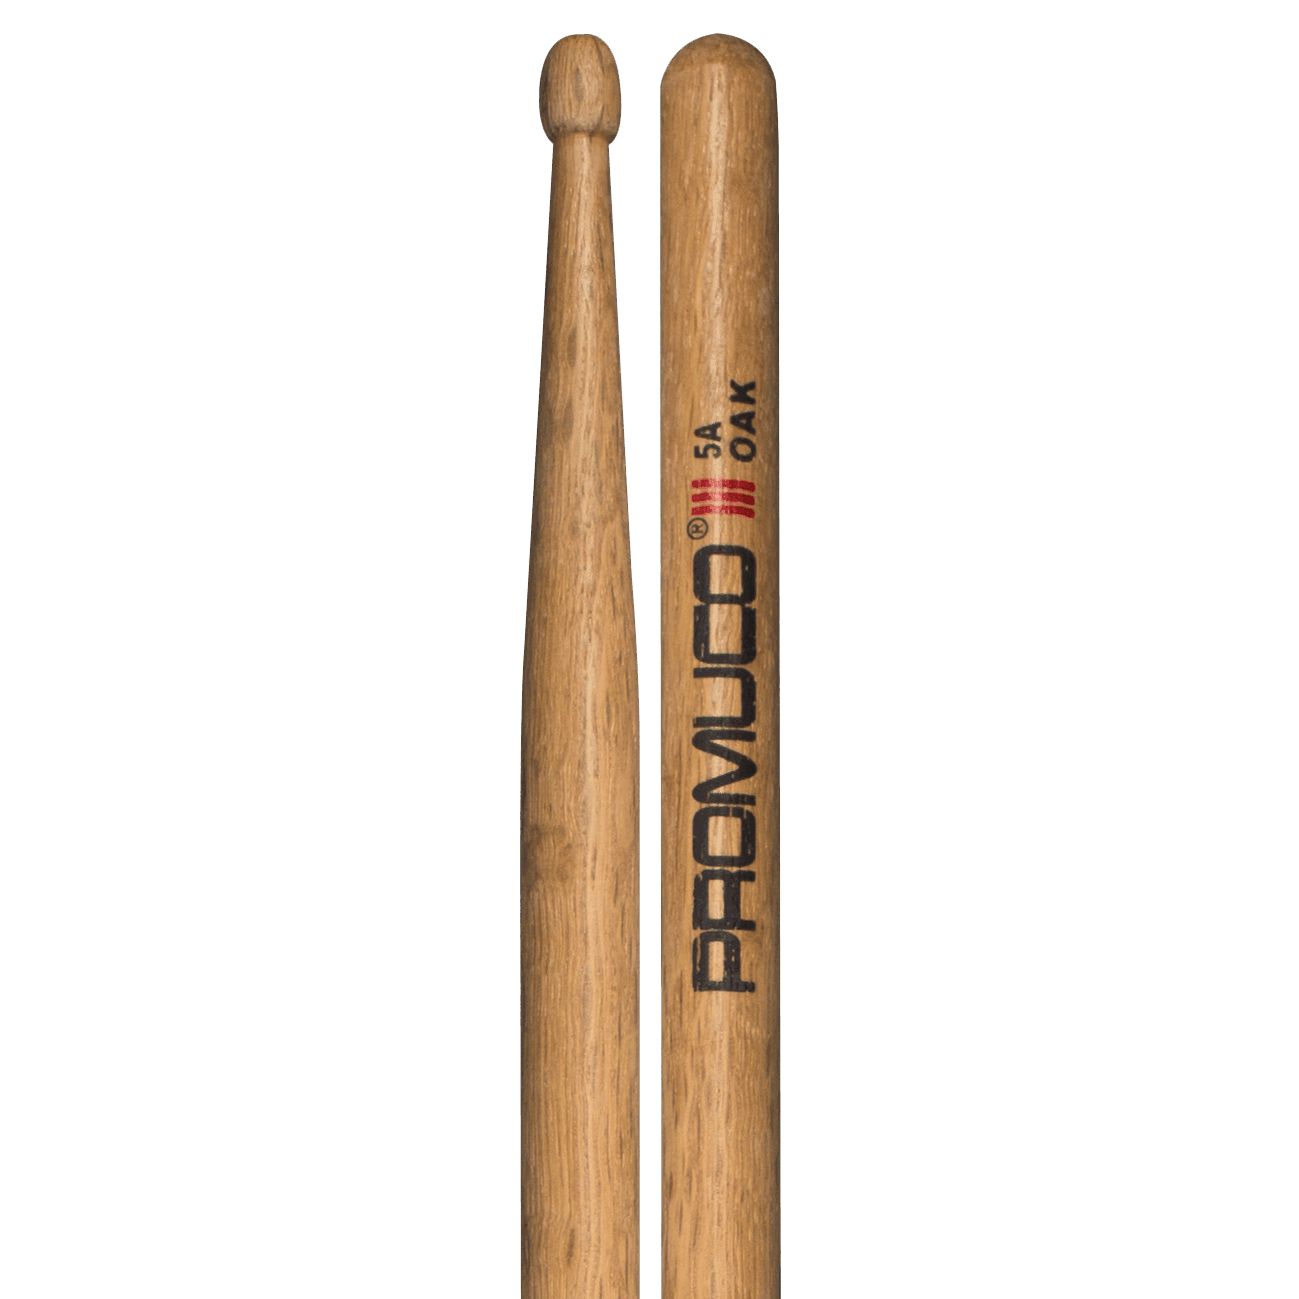 Promuco Oak 5A Wood Tip Drumsticks - Drums & Percussion - Sticks & Mallets by Promuco at Muso's Stuff